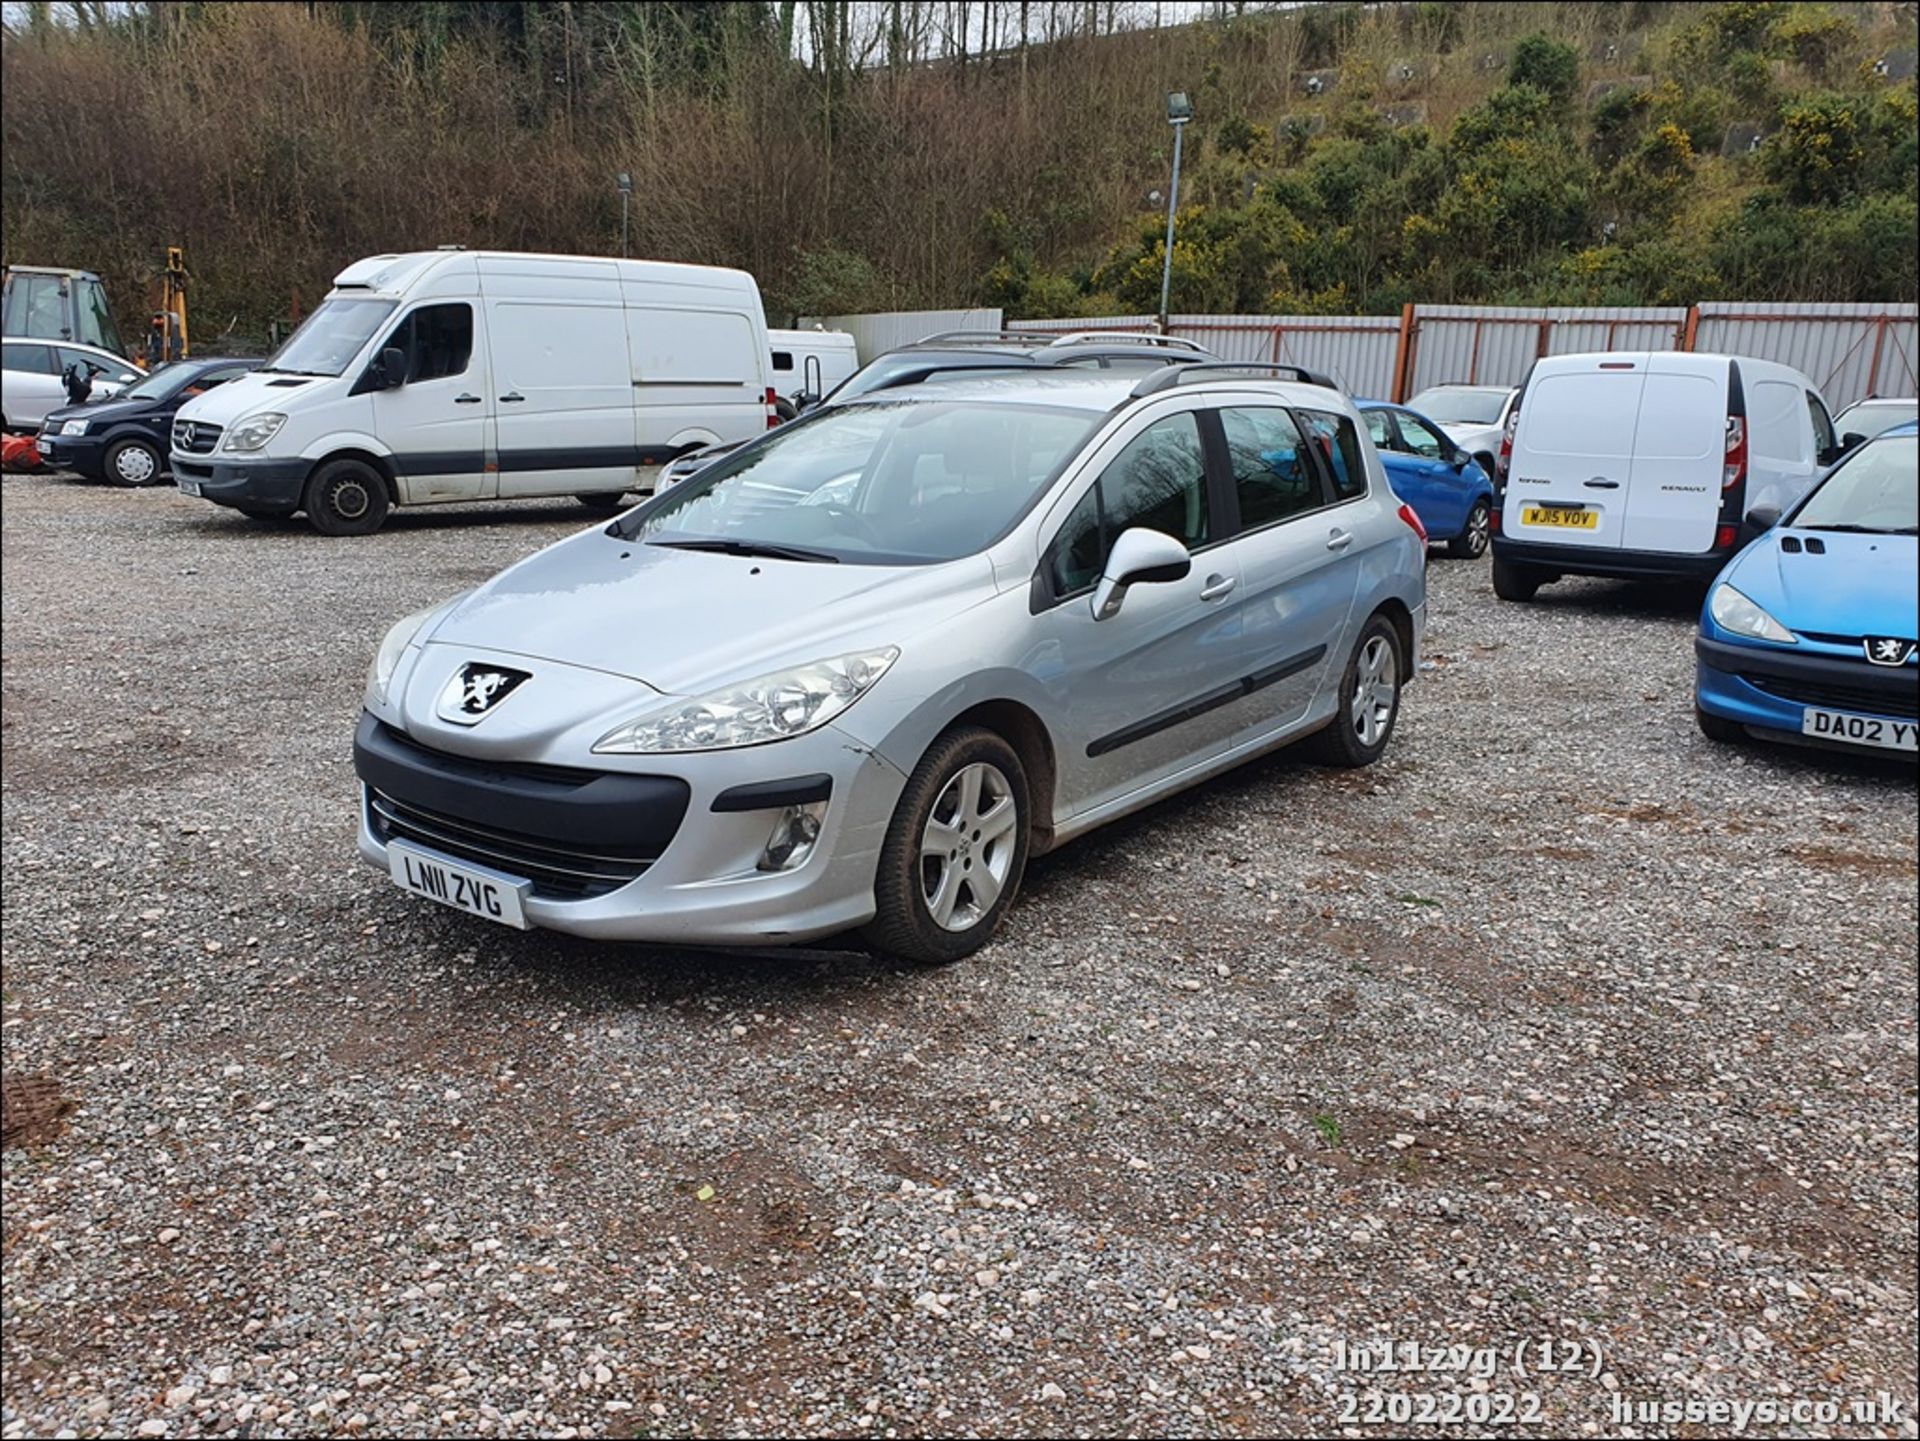 11/11 PEUGEOT 308 S SW HDI 92 - 1560cc 5dr Estate (Silver, 115k) - Image 13 of 46